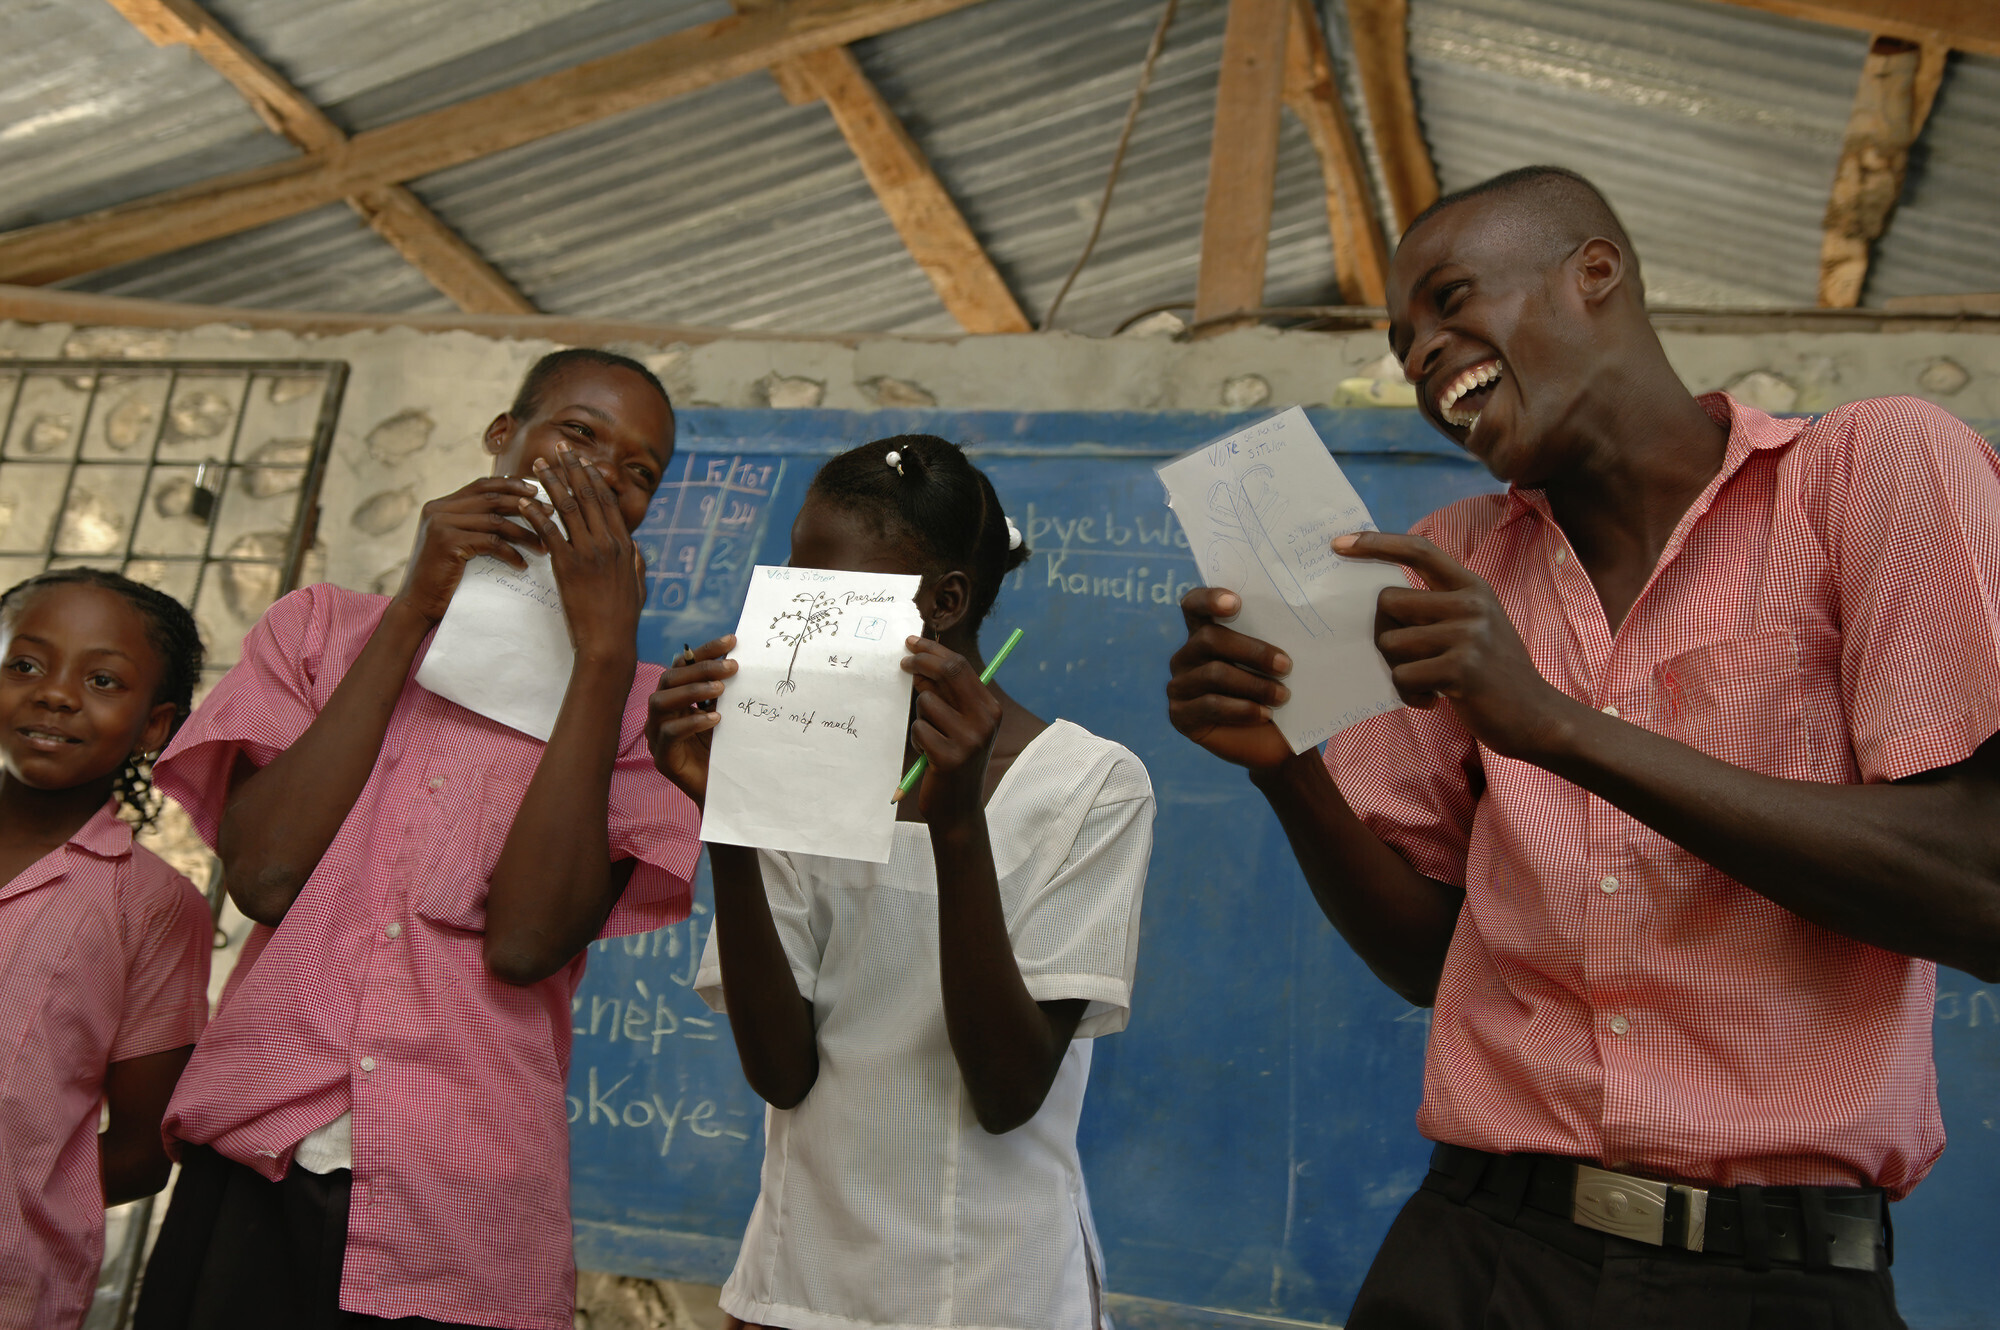 Four Haitian students stand in front of a blackboard and laugh